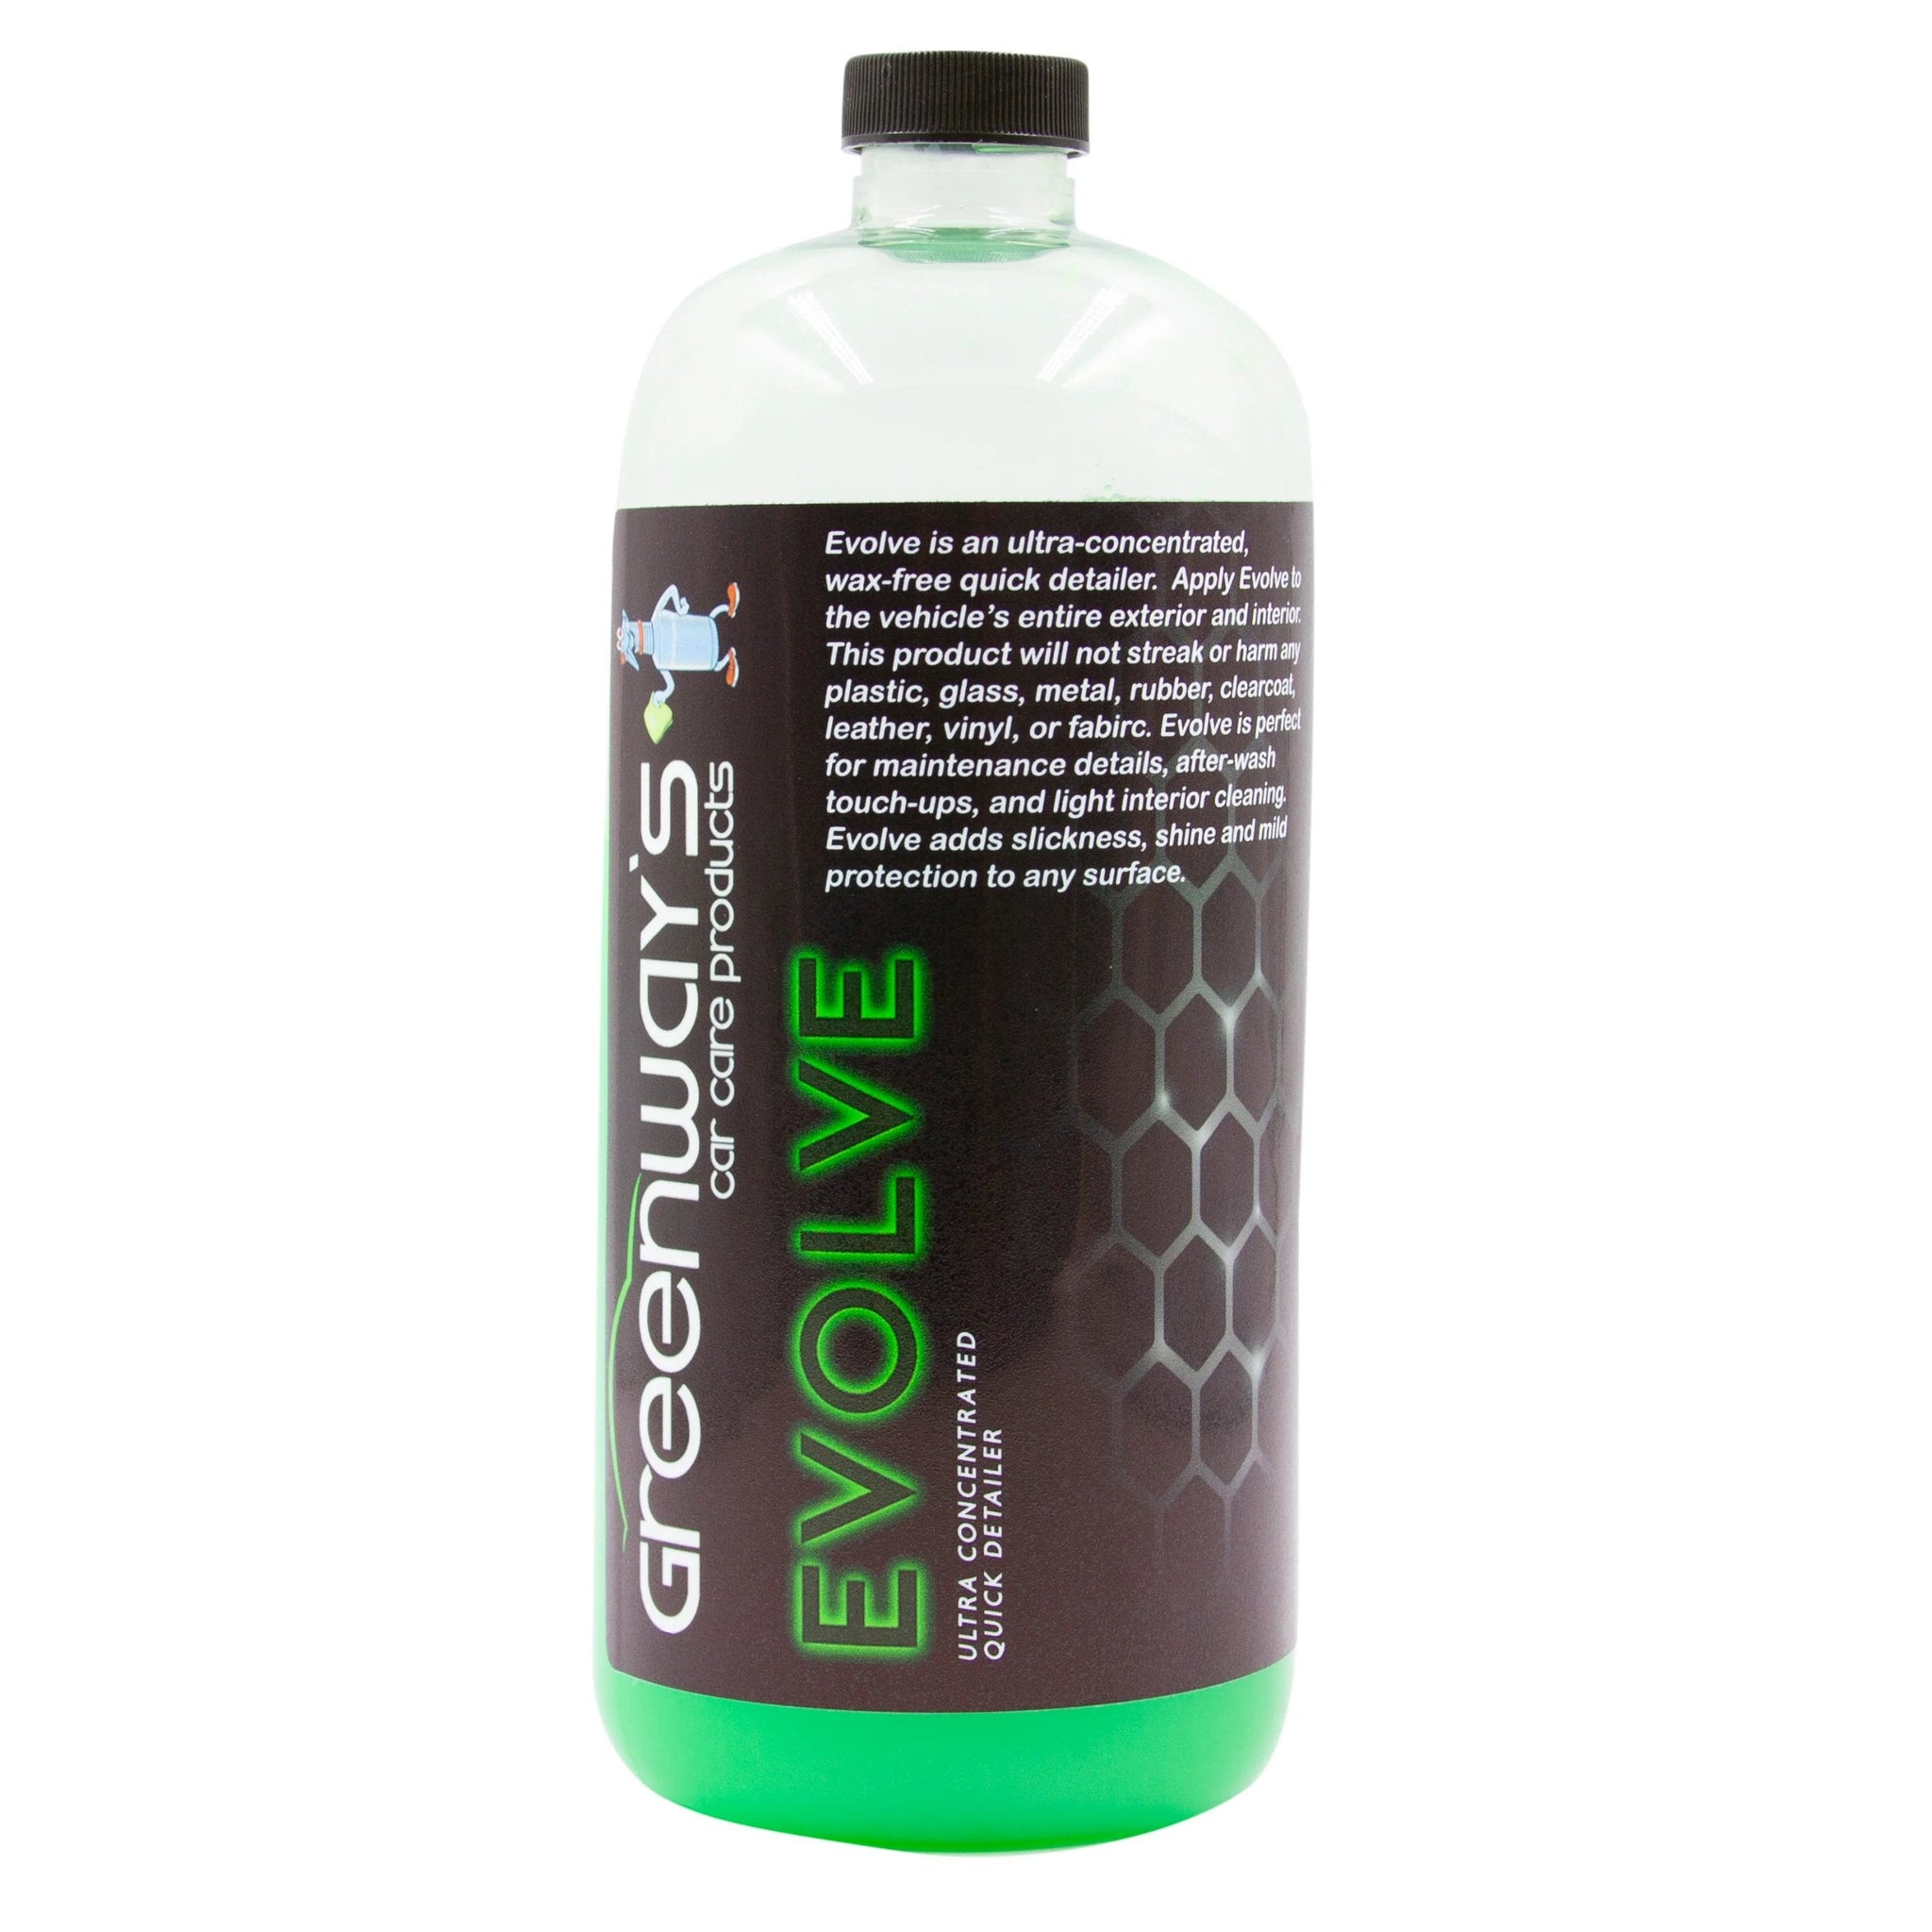 Evolve- Super Concentrated Spray Detailer- Use on Paint, Glass, Trim and Interior